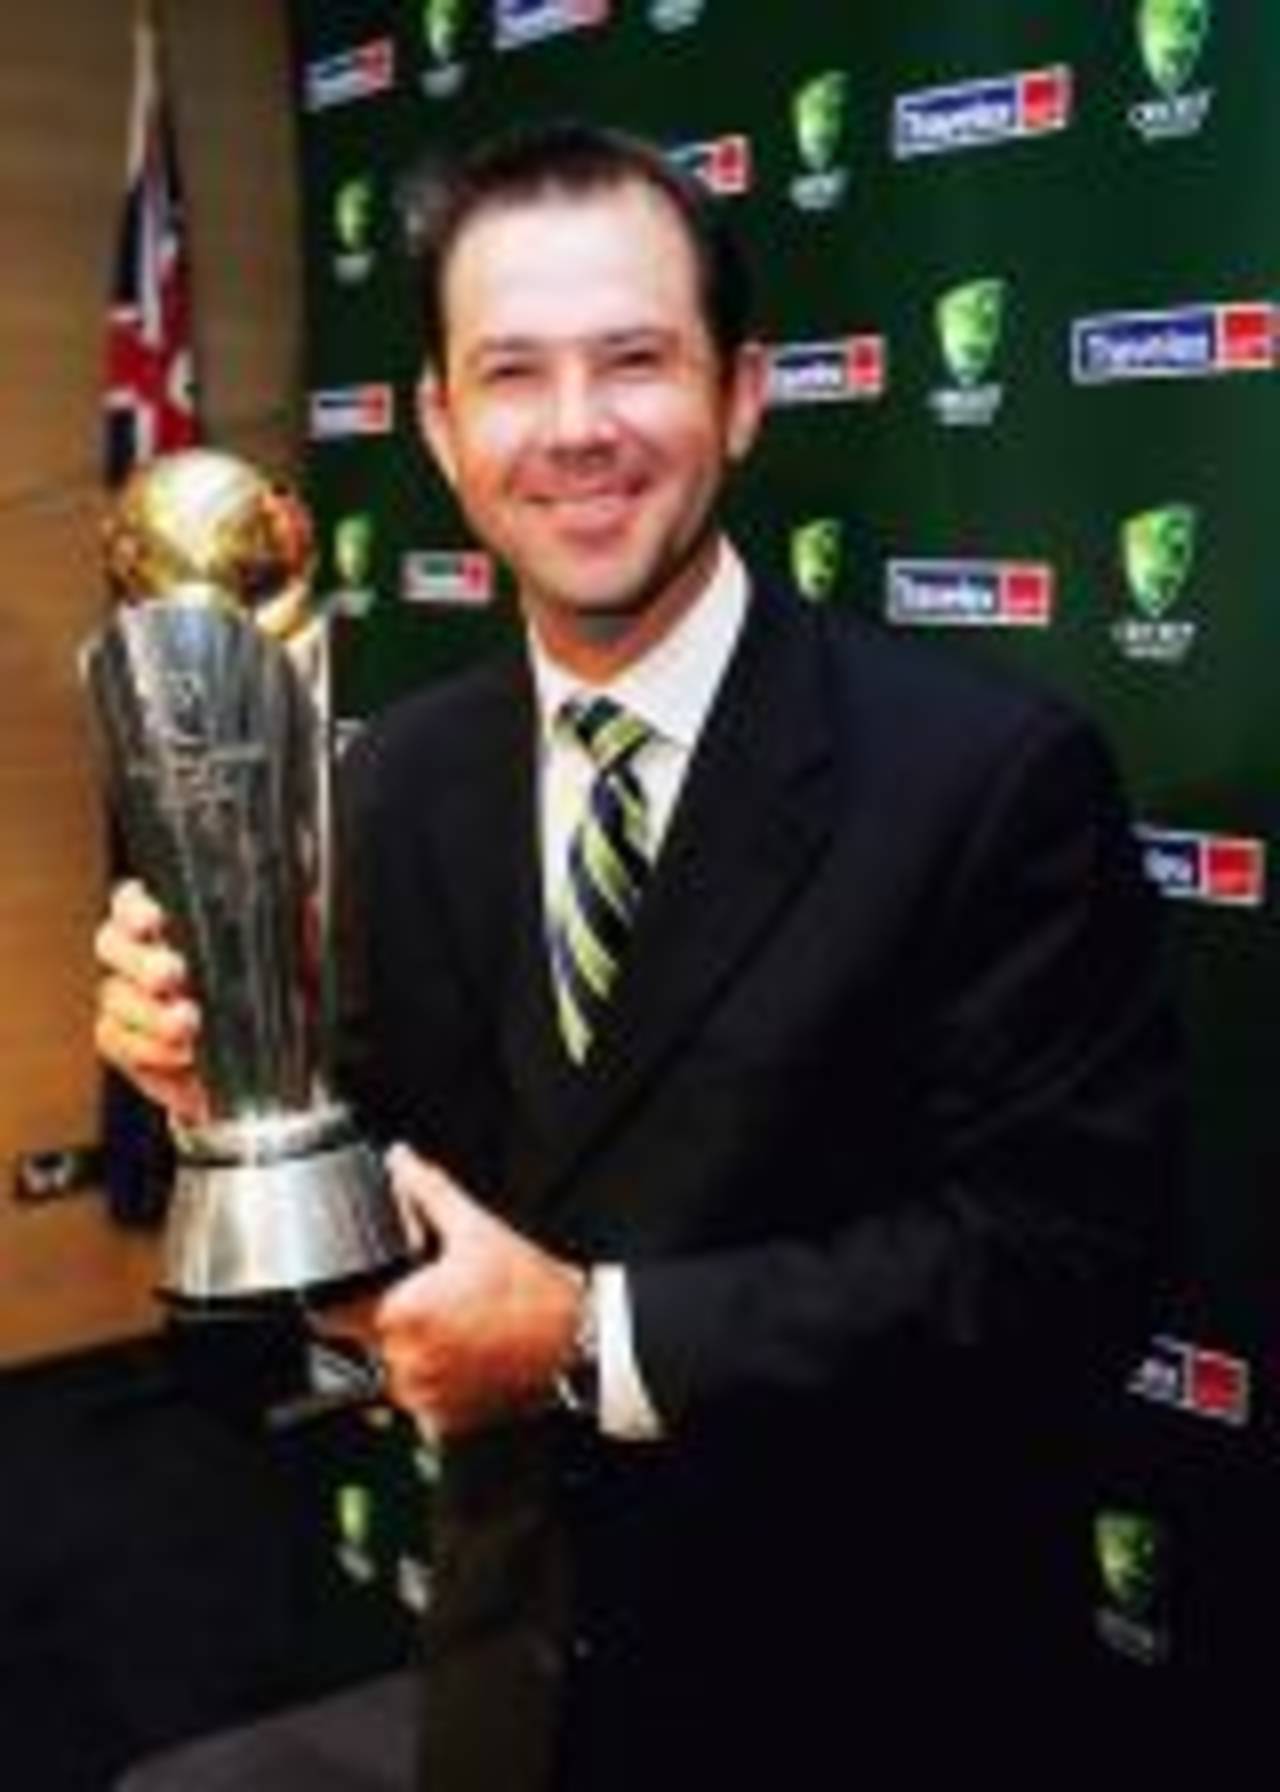 Ricky Ponting poses with the Champions Trophy on arrival at Sydney International Airport after Australia's Champions Trophy victory, Sydney, November 7, 2006 